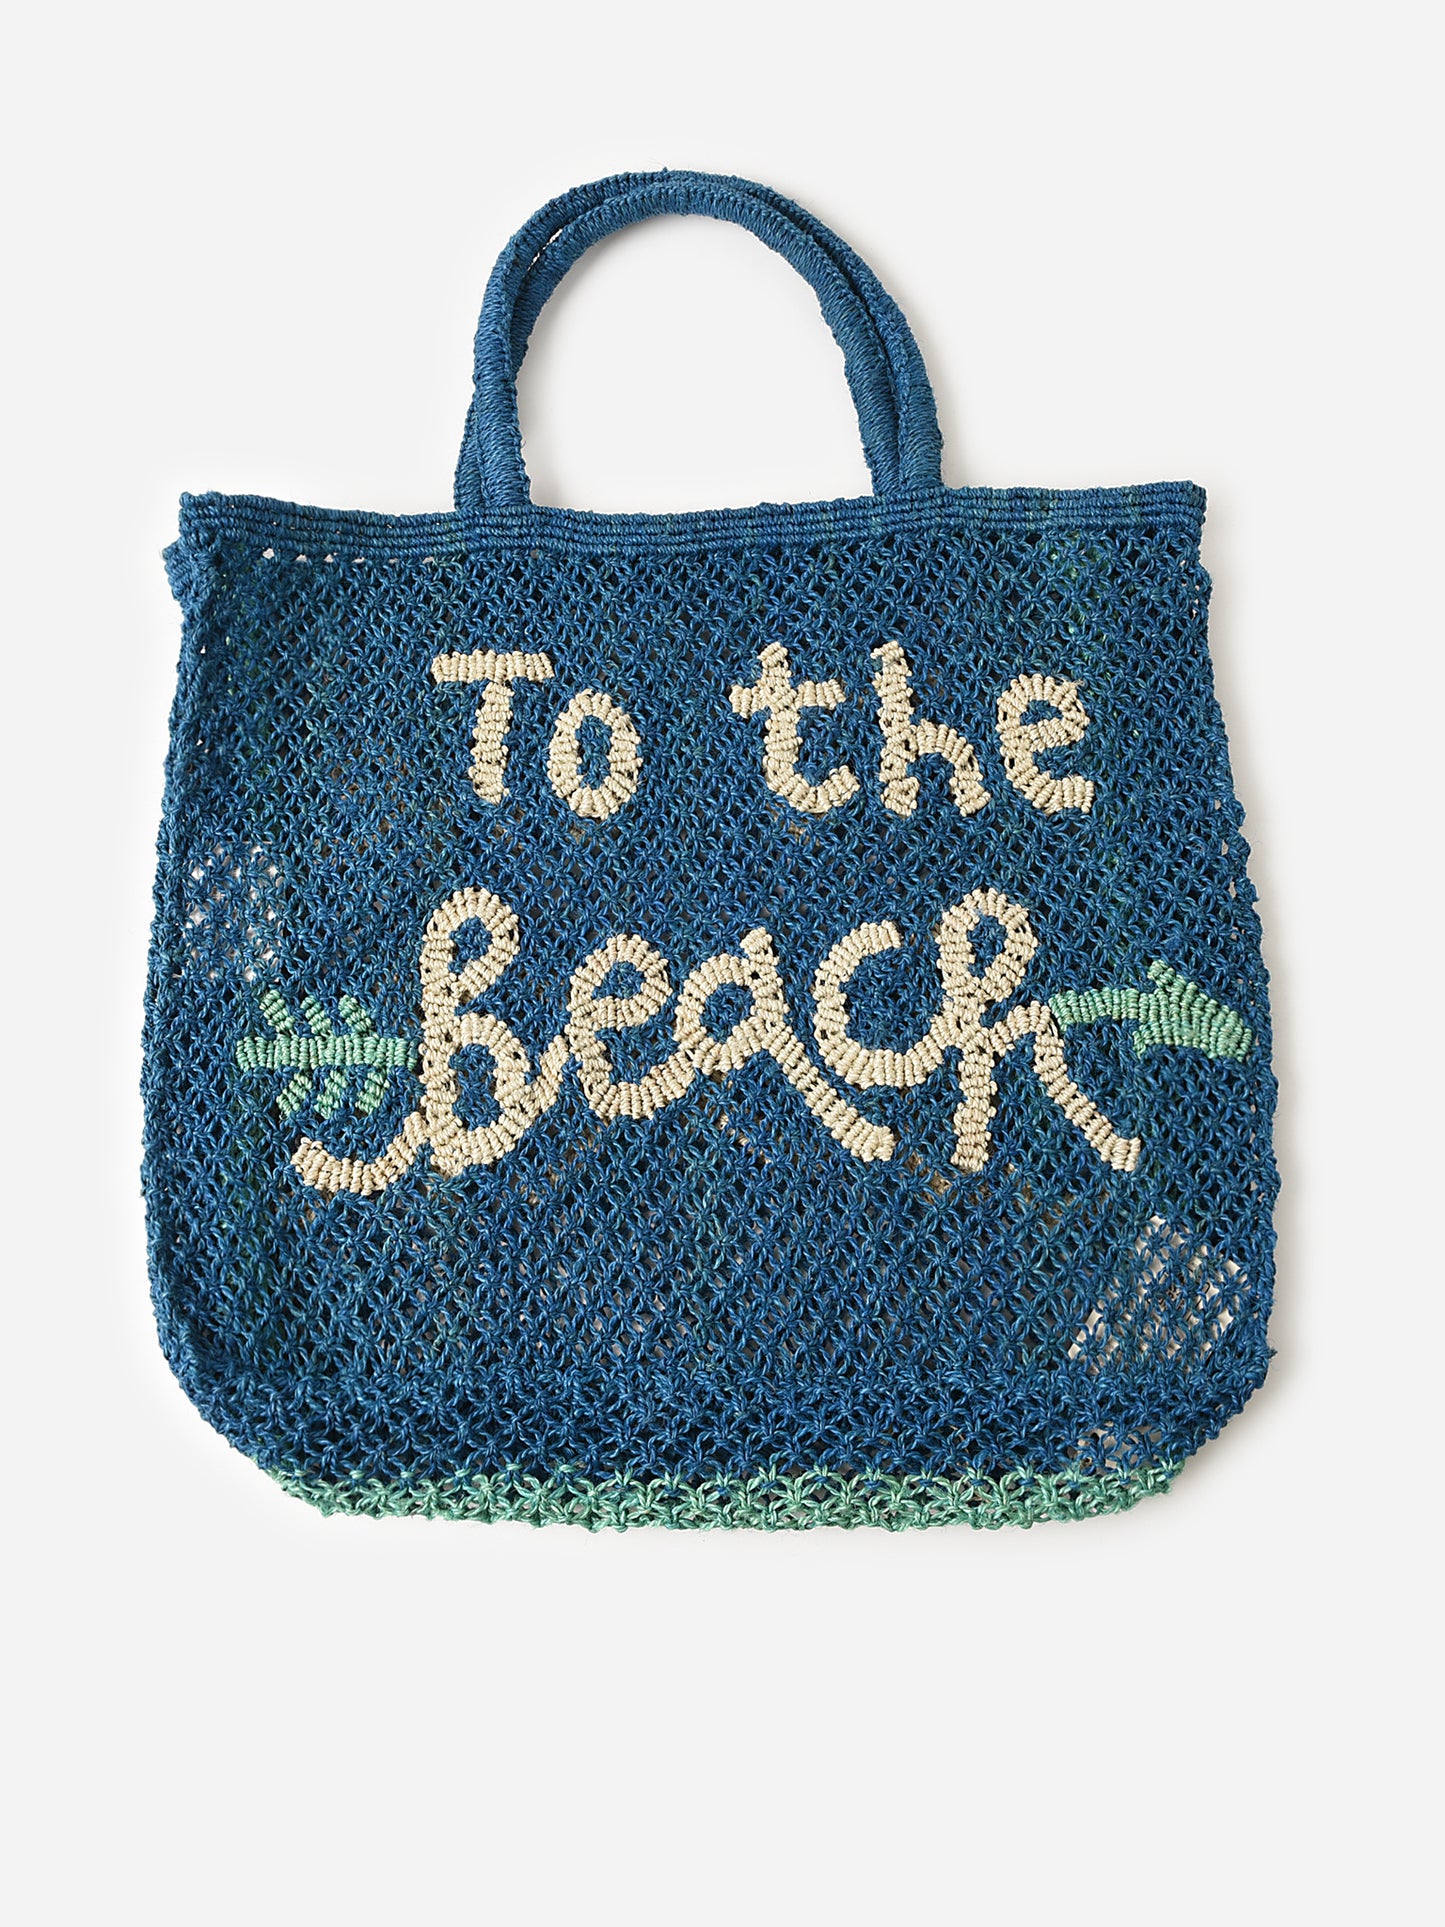 The Jacksons To The Beach Tote